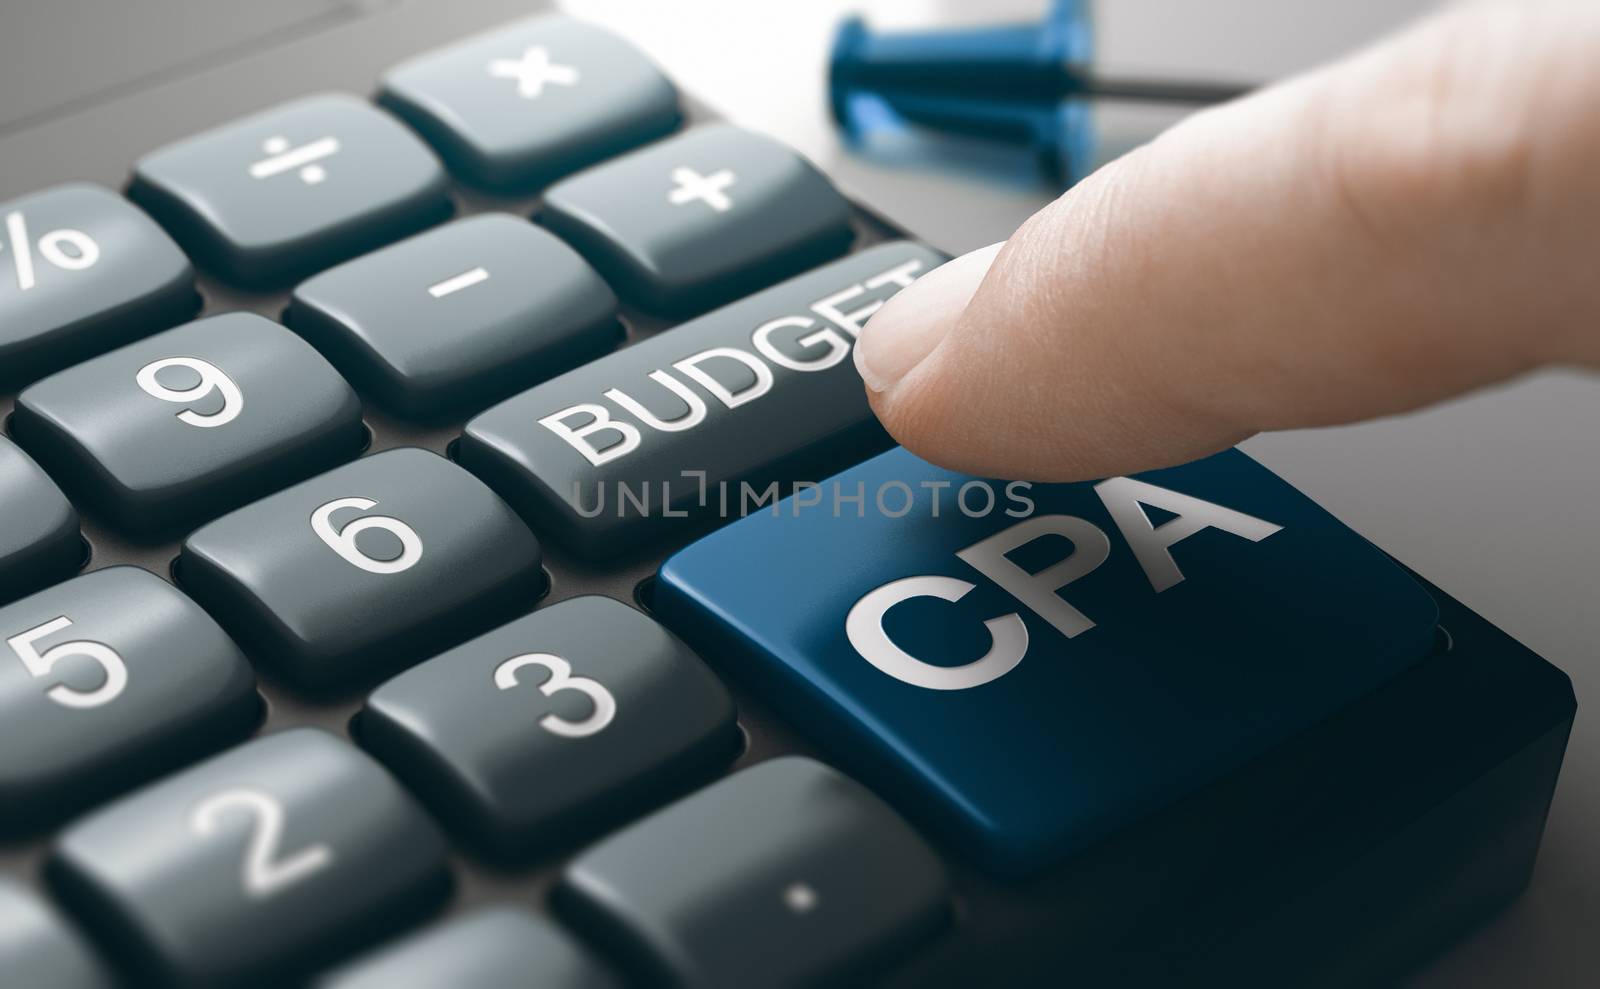 Finger pushing a conceptual calculator button to calculate marketing campaign budget and cpa (cost per action or acquisition). Composite image between a hand photography and a 3D background.